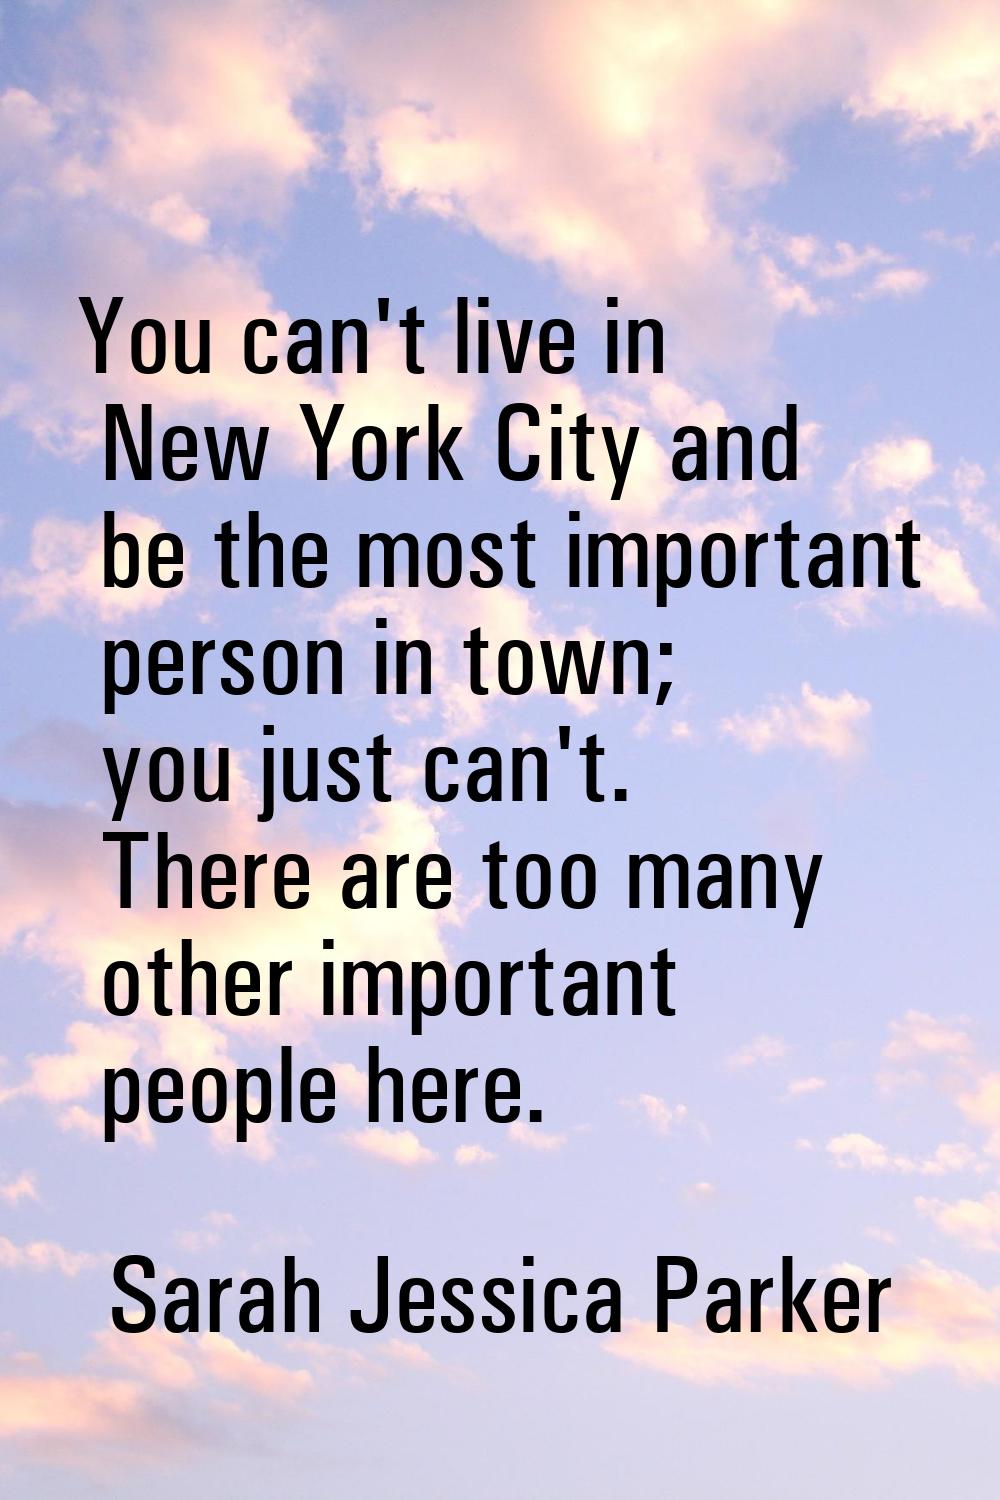 You can't live in New York City and be the most important person in town; you just can't. There are